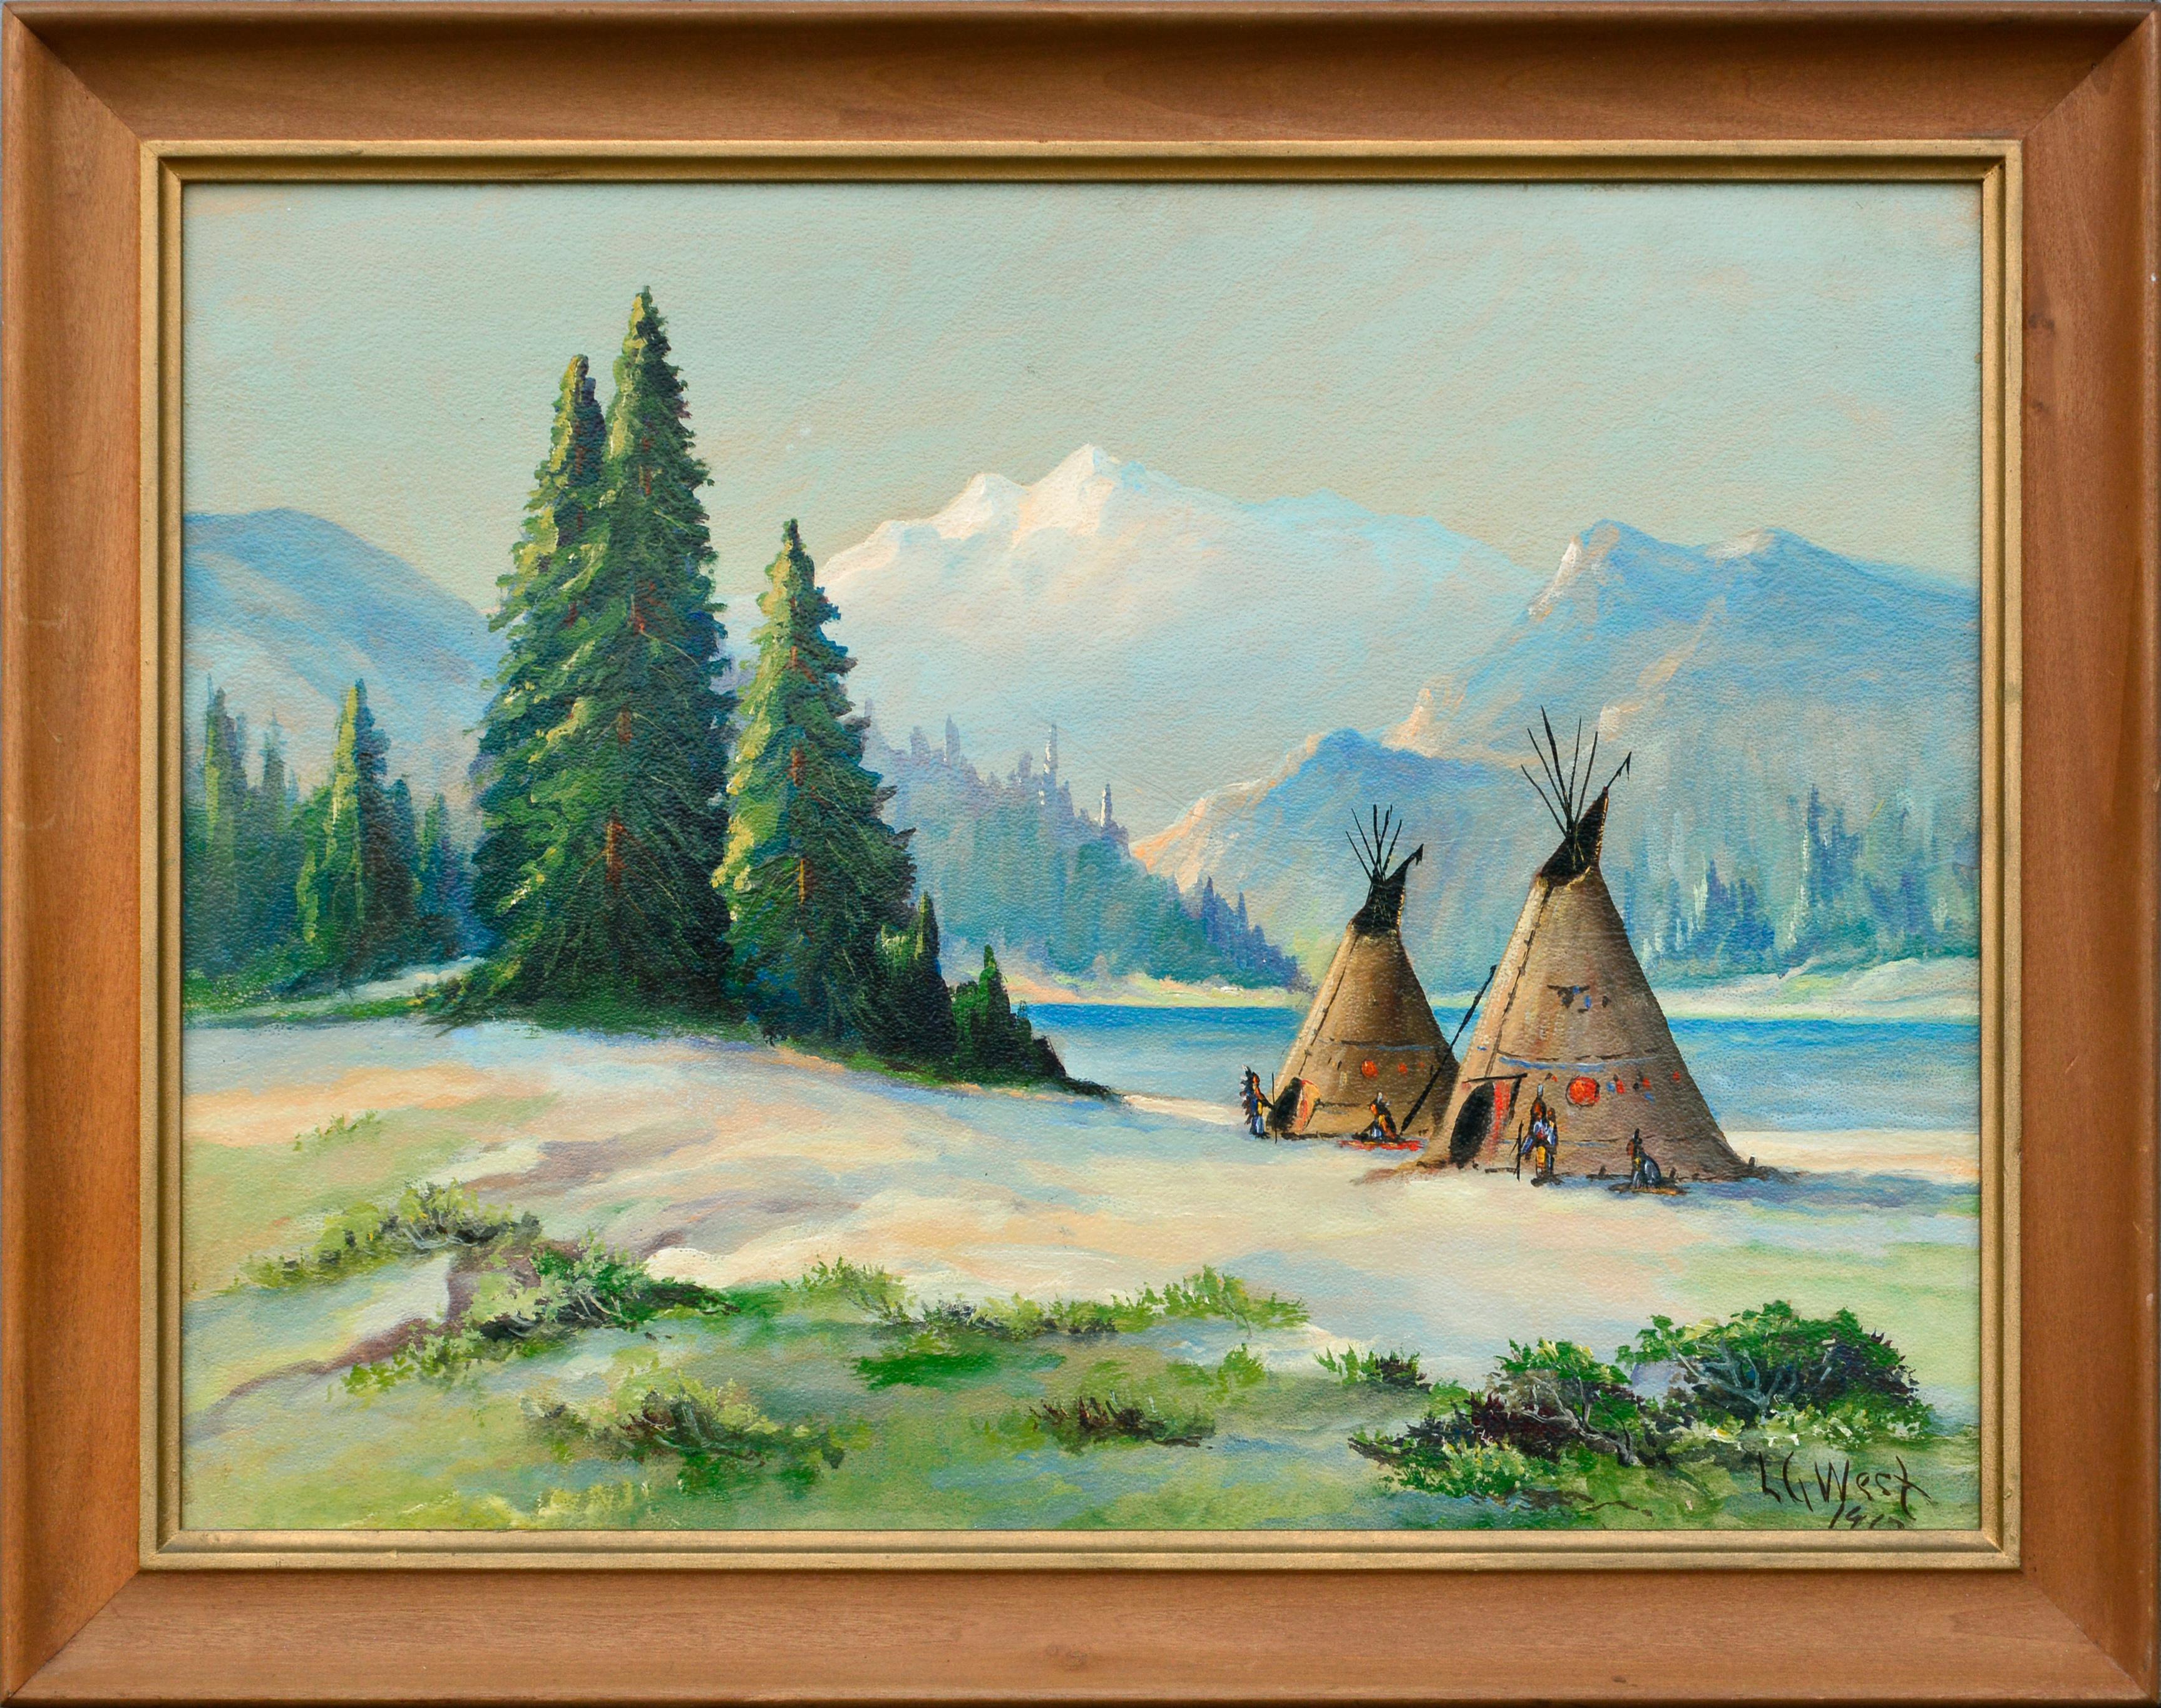 L. G. West Landscape Painting - Native American Camp by the Lake - Landscape